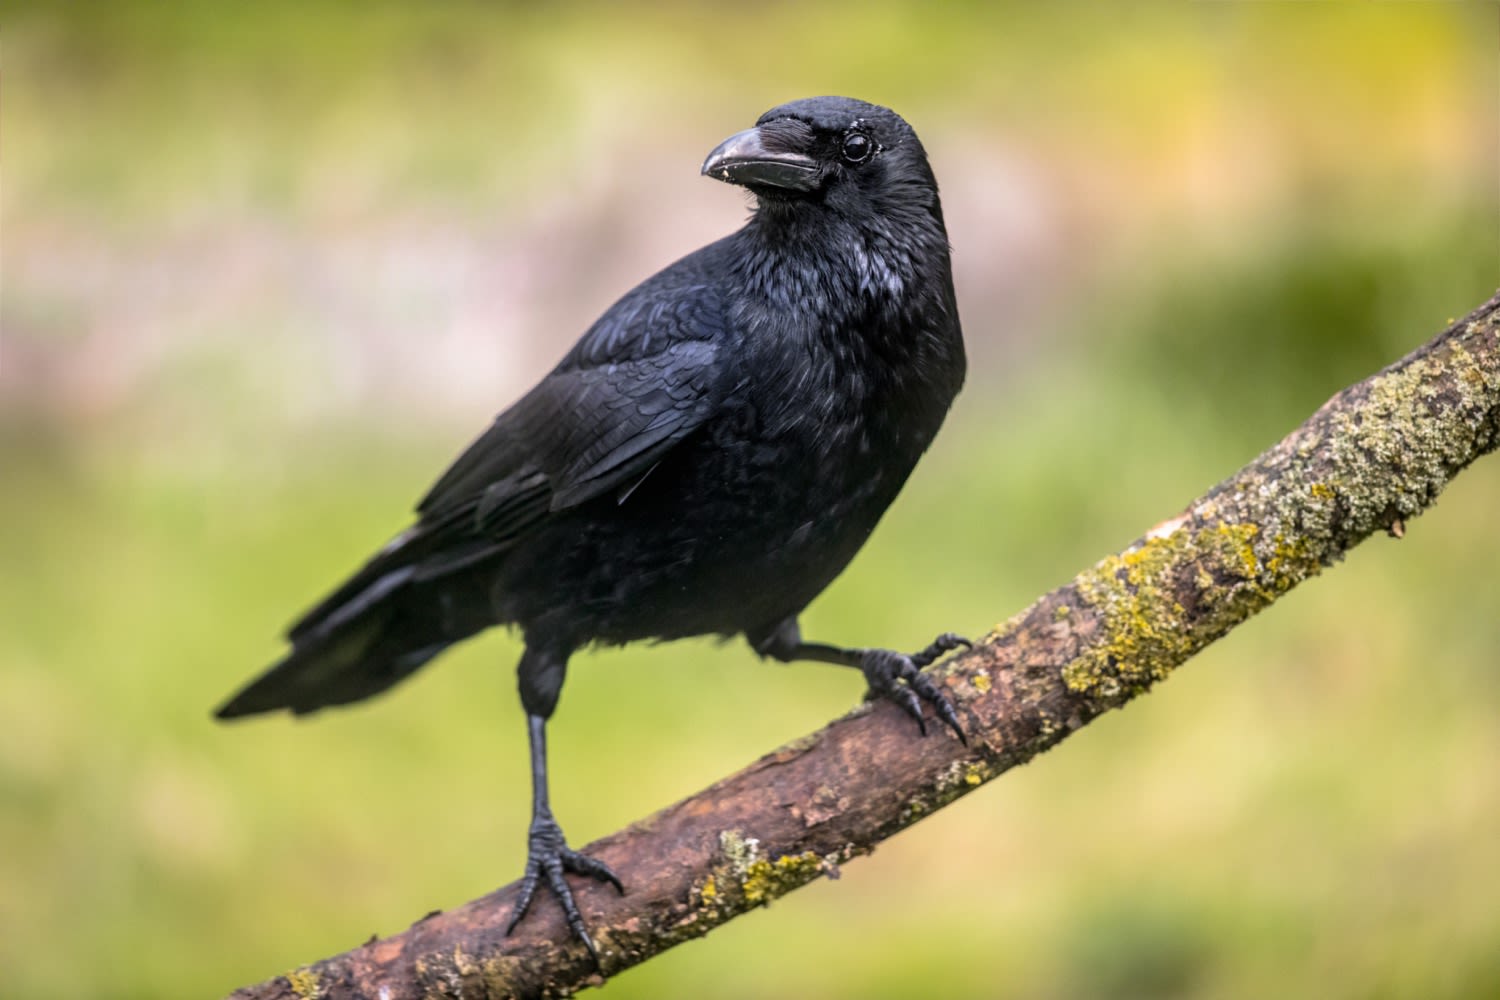 Crows can count and they do it out loud